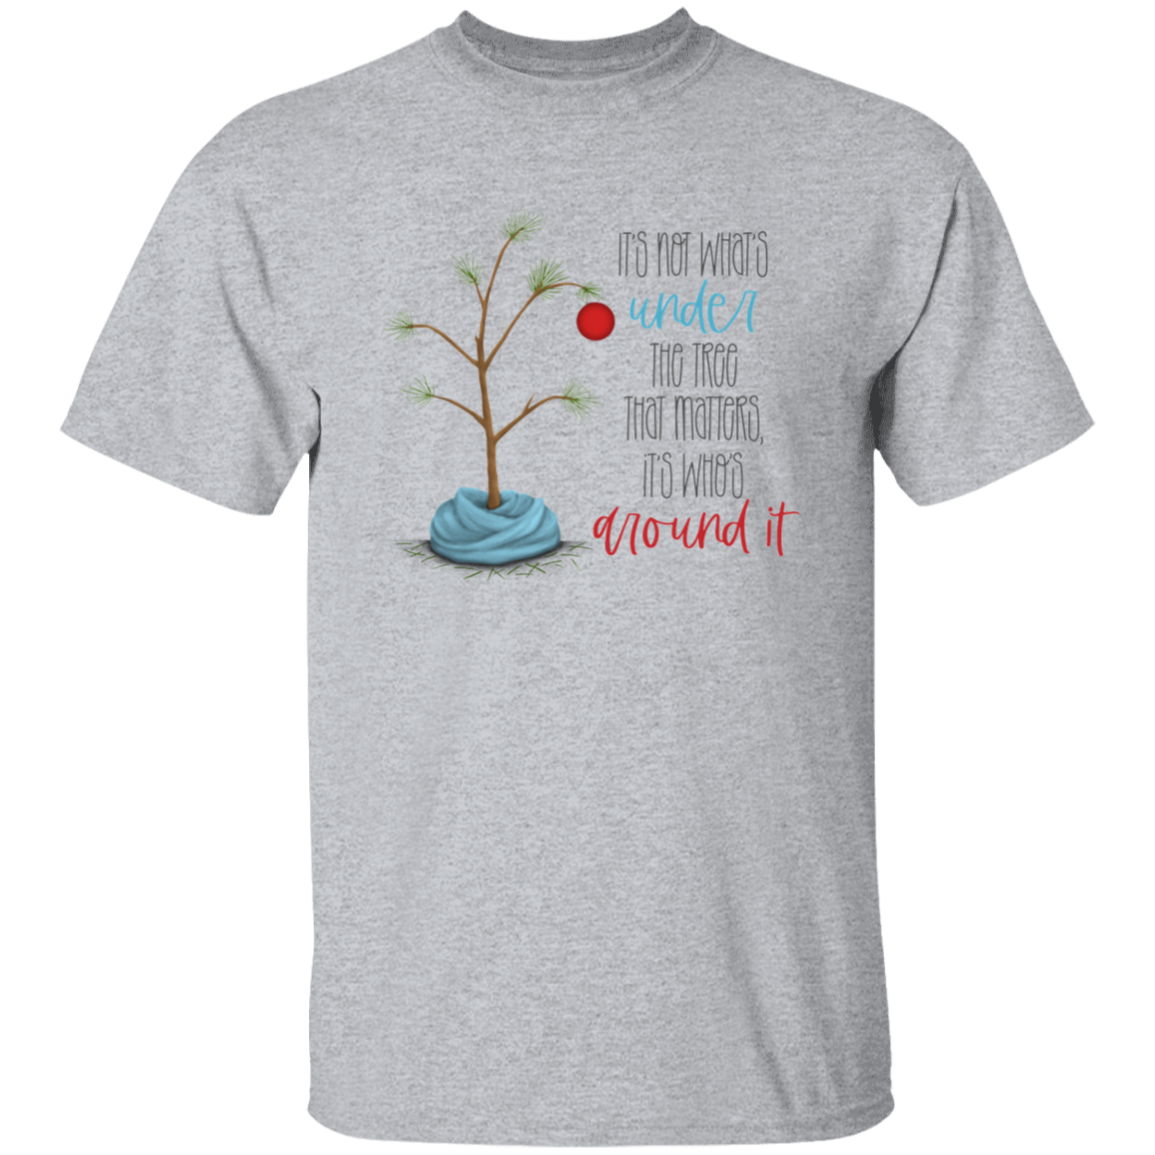 It's Not What's Under the Tree  T-Shirt